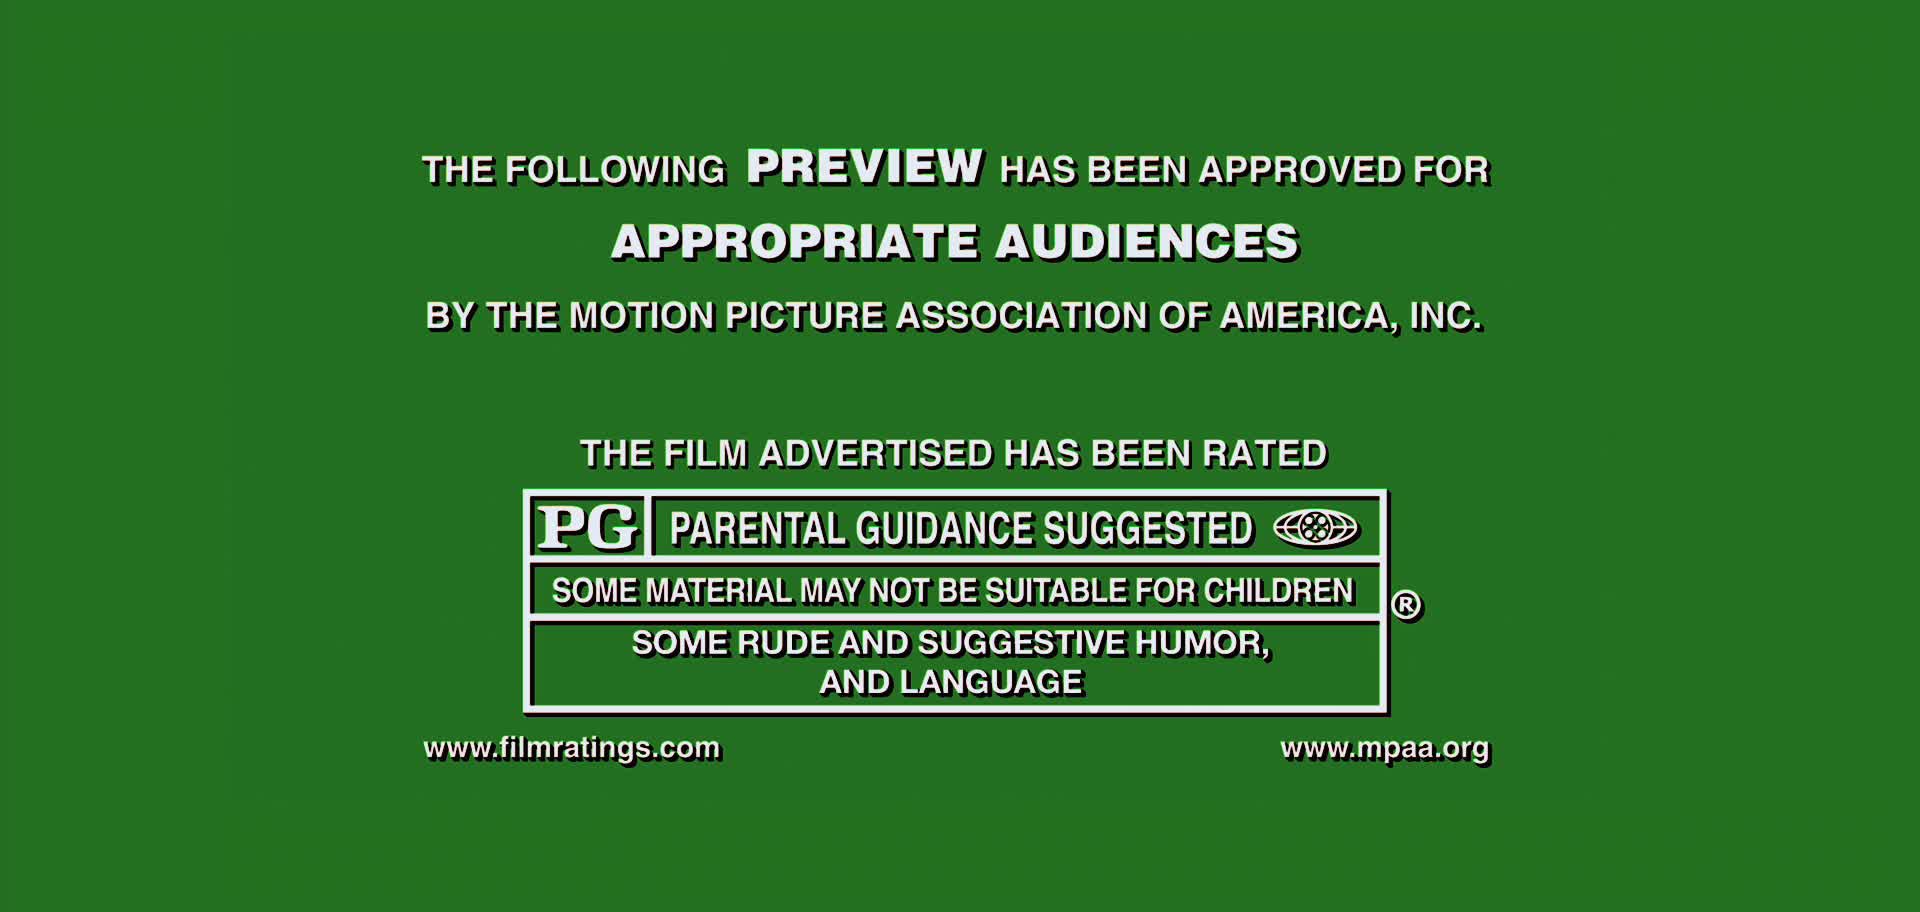 The following Preview has been approved for all audiences. G MPAA. MPAA R. The following Preview has been approved for all audiences by the Motion picture Association of America Inc. Appropriate audiences